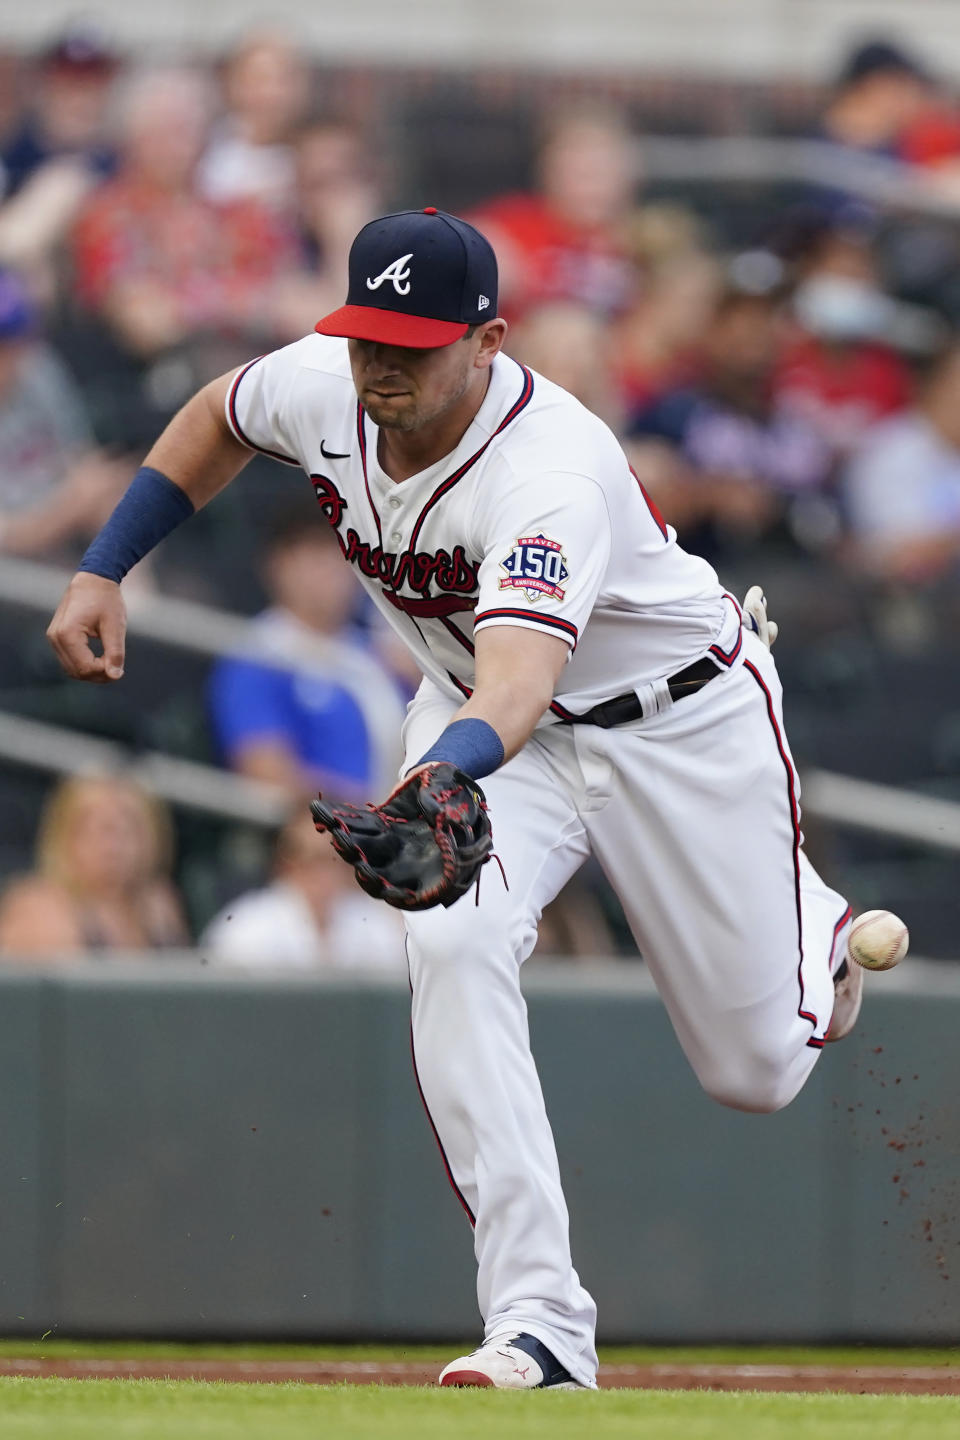 Atlanta Braves third baseman Austin Riley can't reach a ball hit for a single by Washington Nationals' Trea Turner in the first inning of a baseball game Tuesday, June 1, 2021, in Atlanta. (AP Photo/John Bazemore)